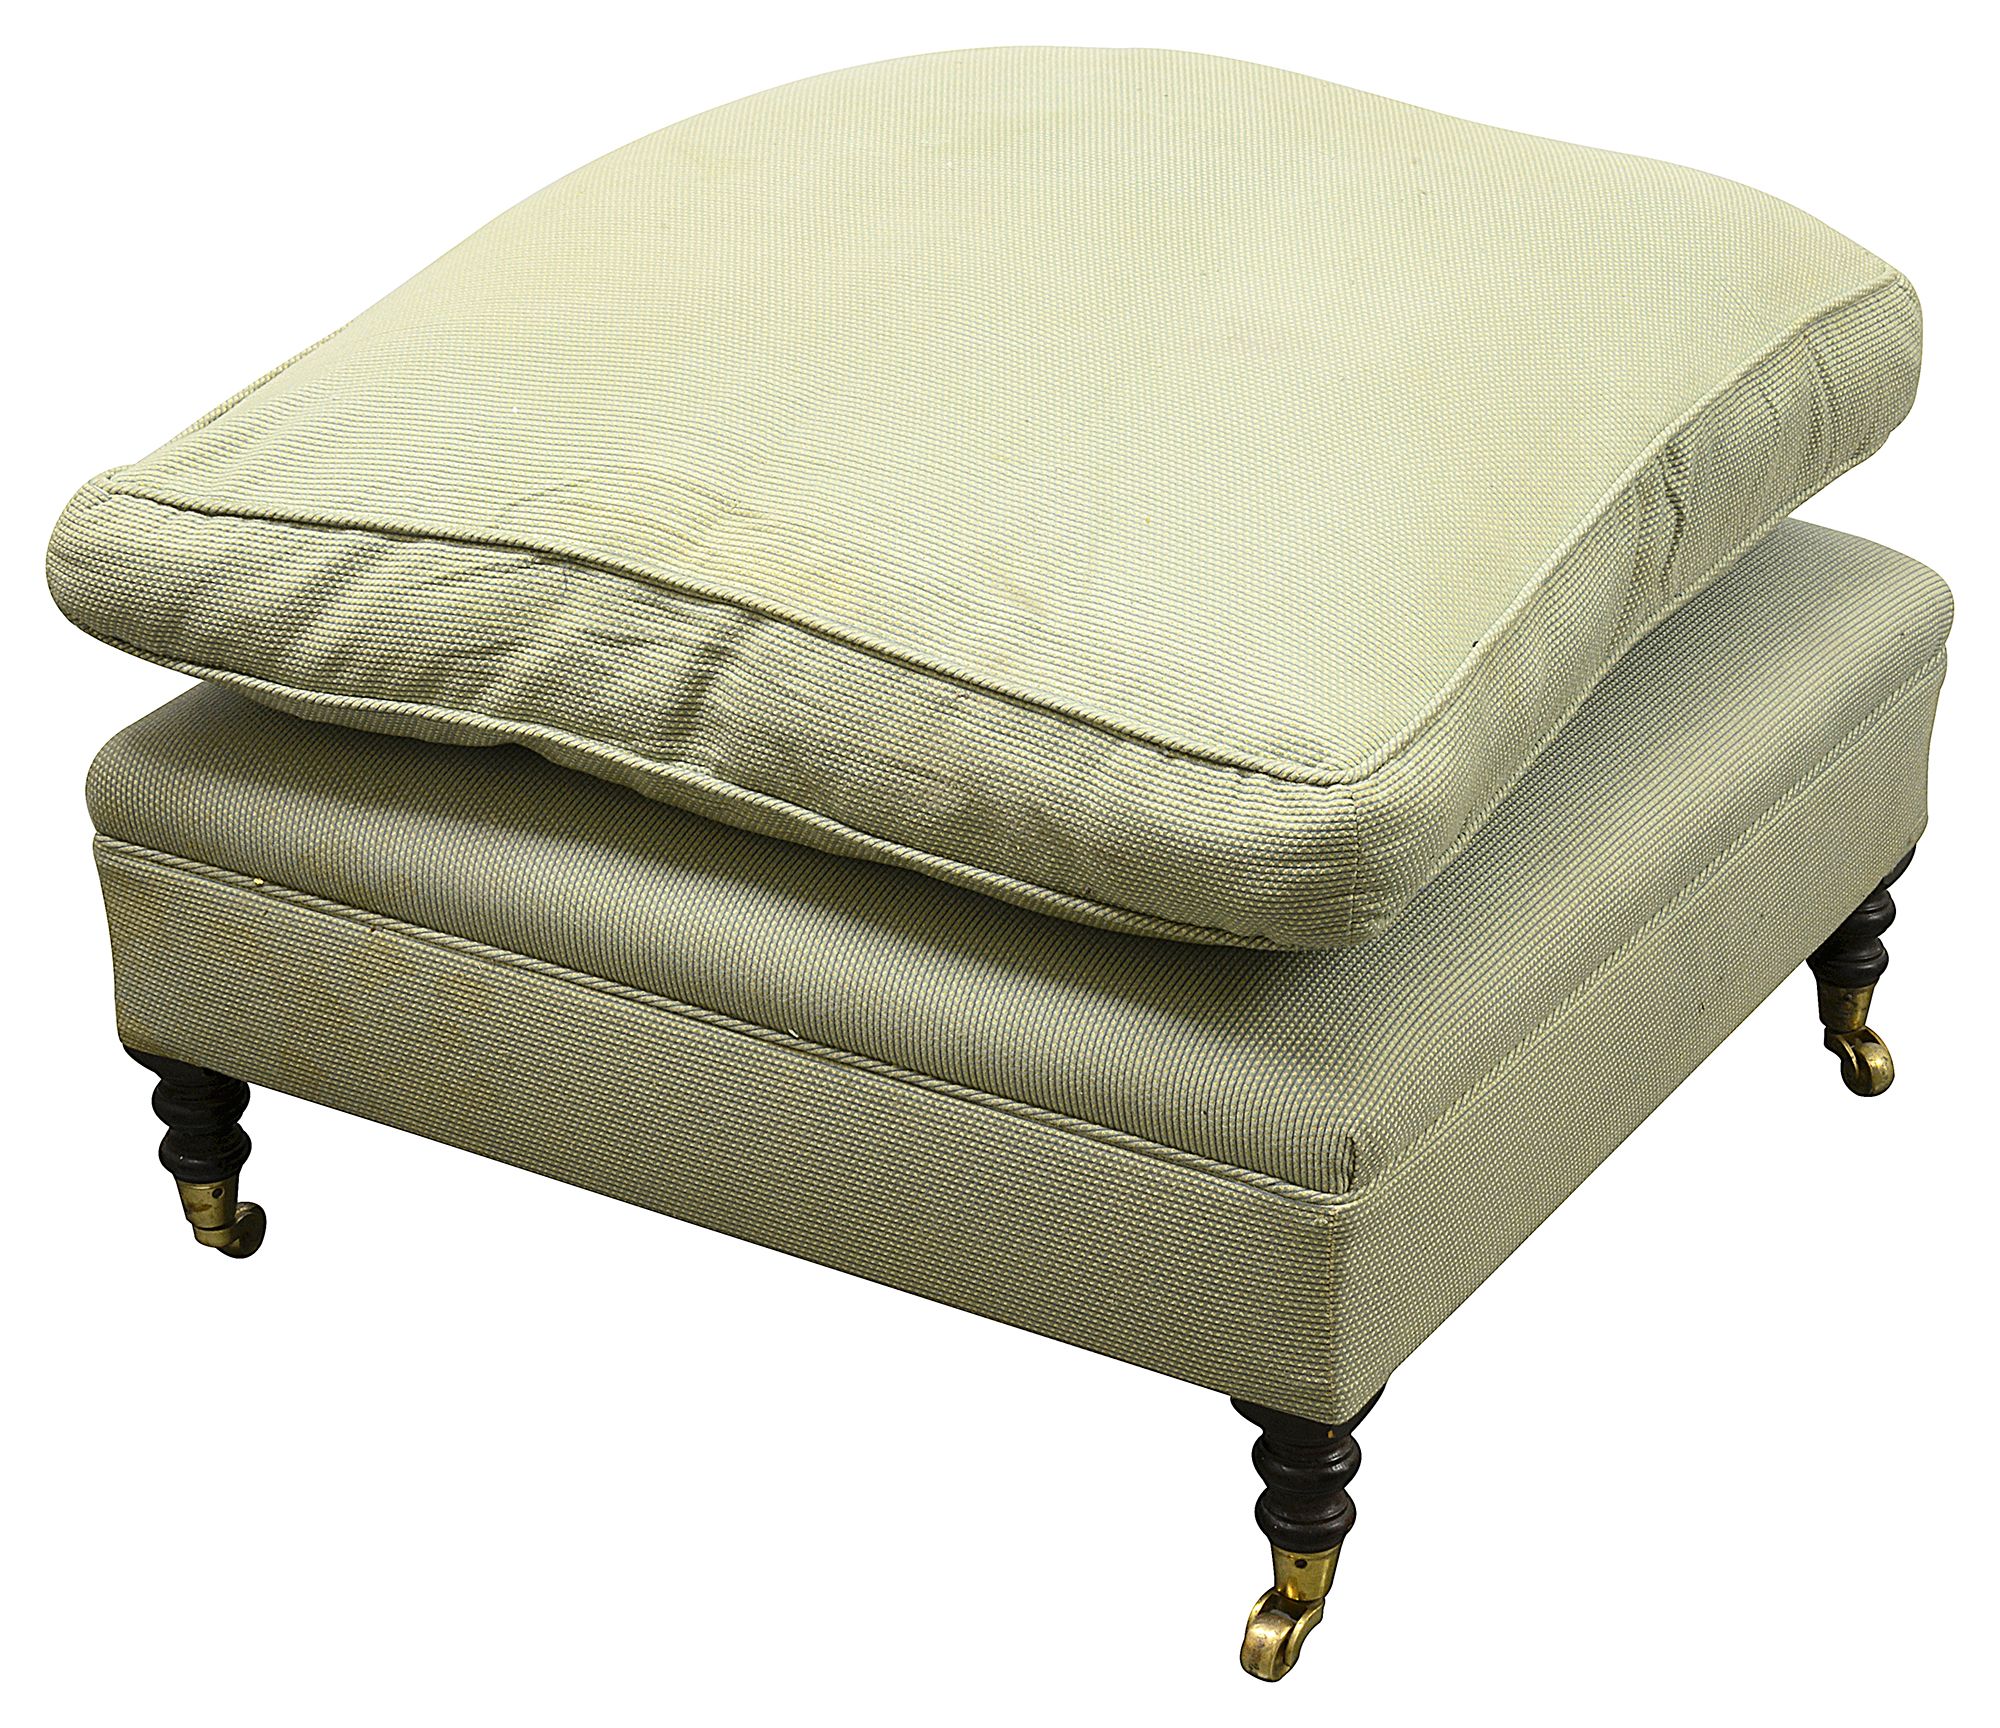 A George Smith upholstered ottoman - Image 2 of 2